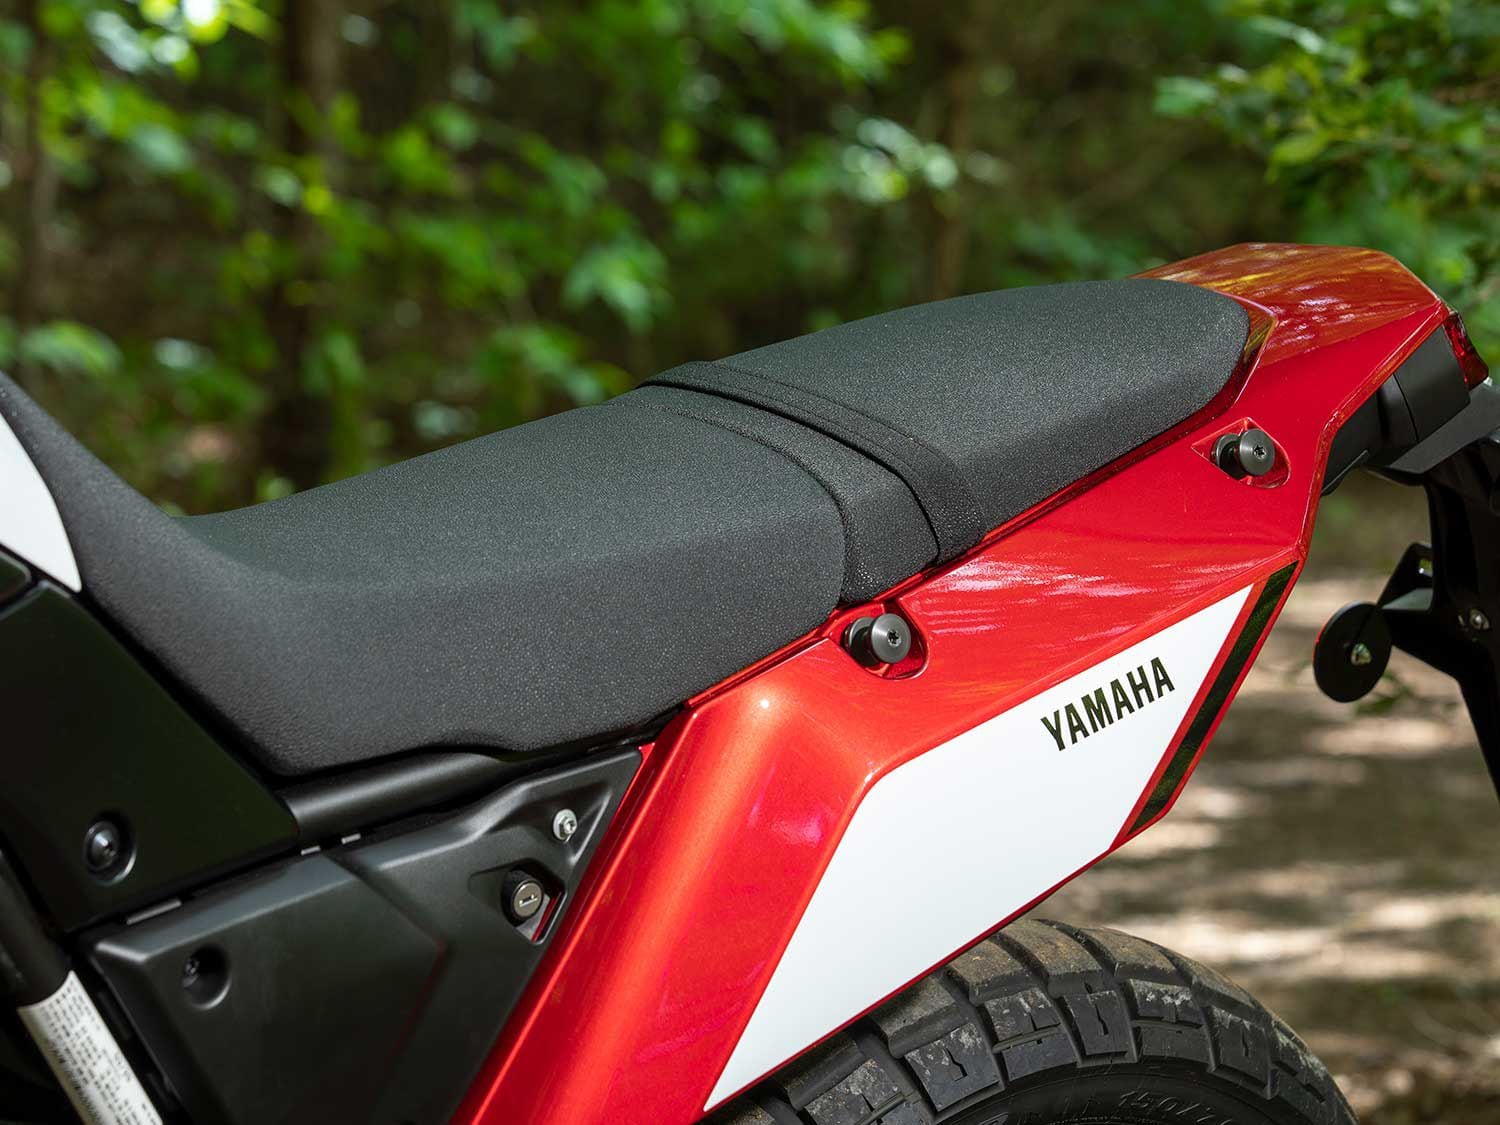 The saddle on the Ténéré 700 is a good compromise between road and off-road duty.